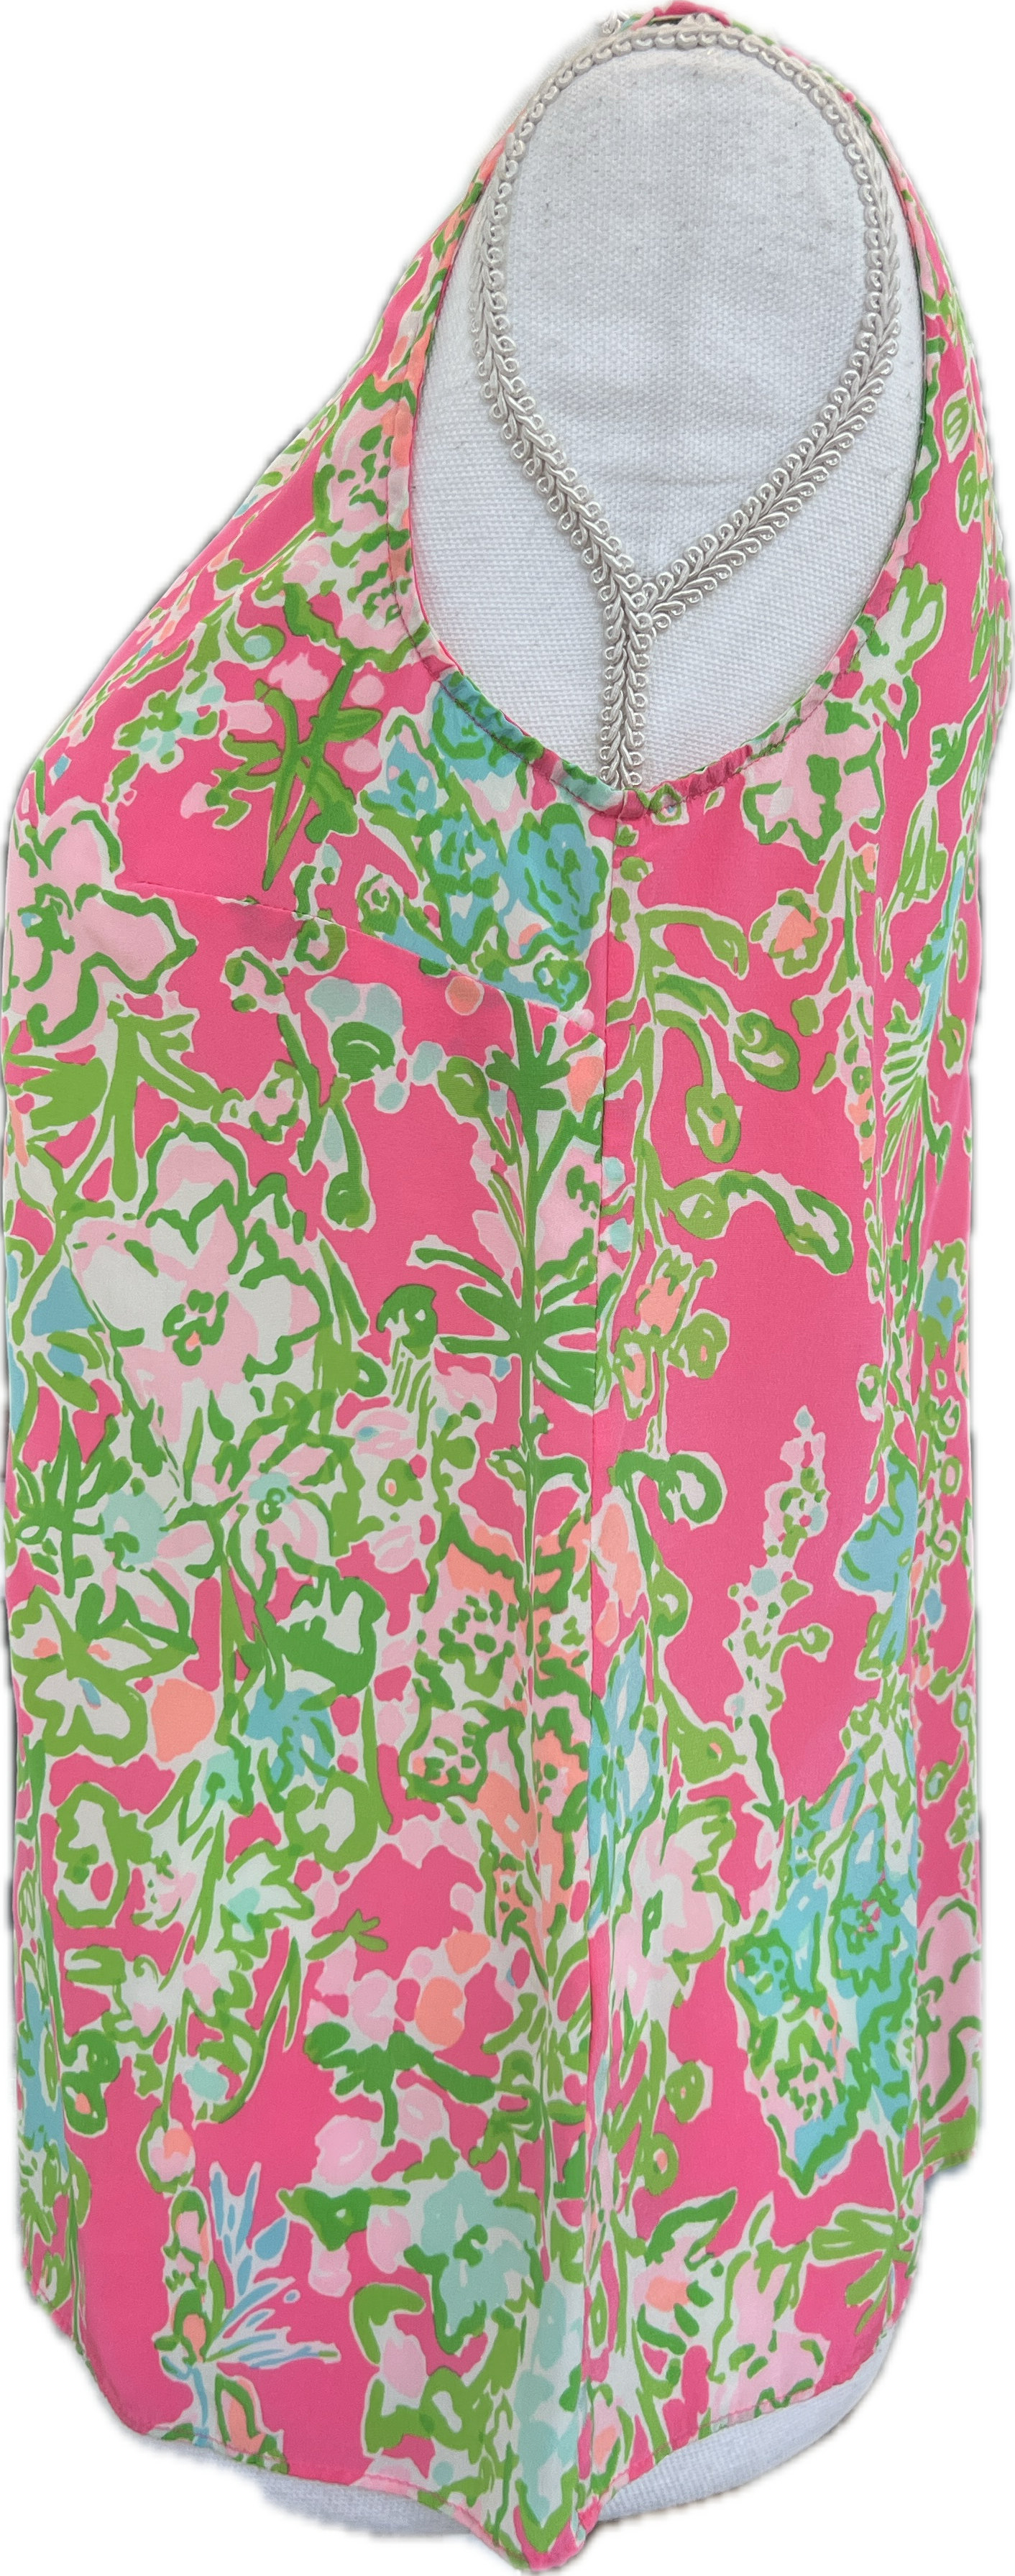 Lilly Pulitzer Southern Charm Pink Green Silk Cipriani Tank Top, XS